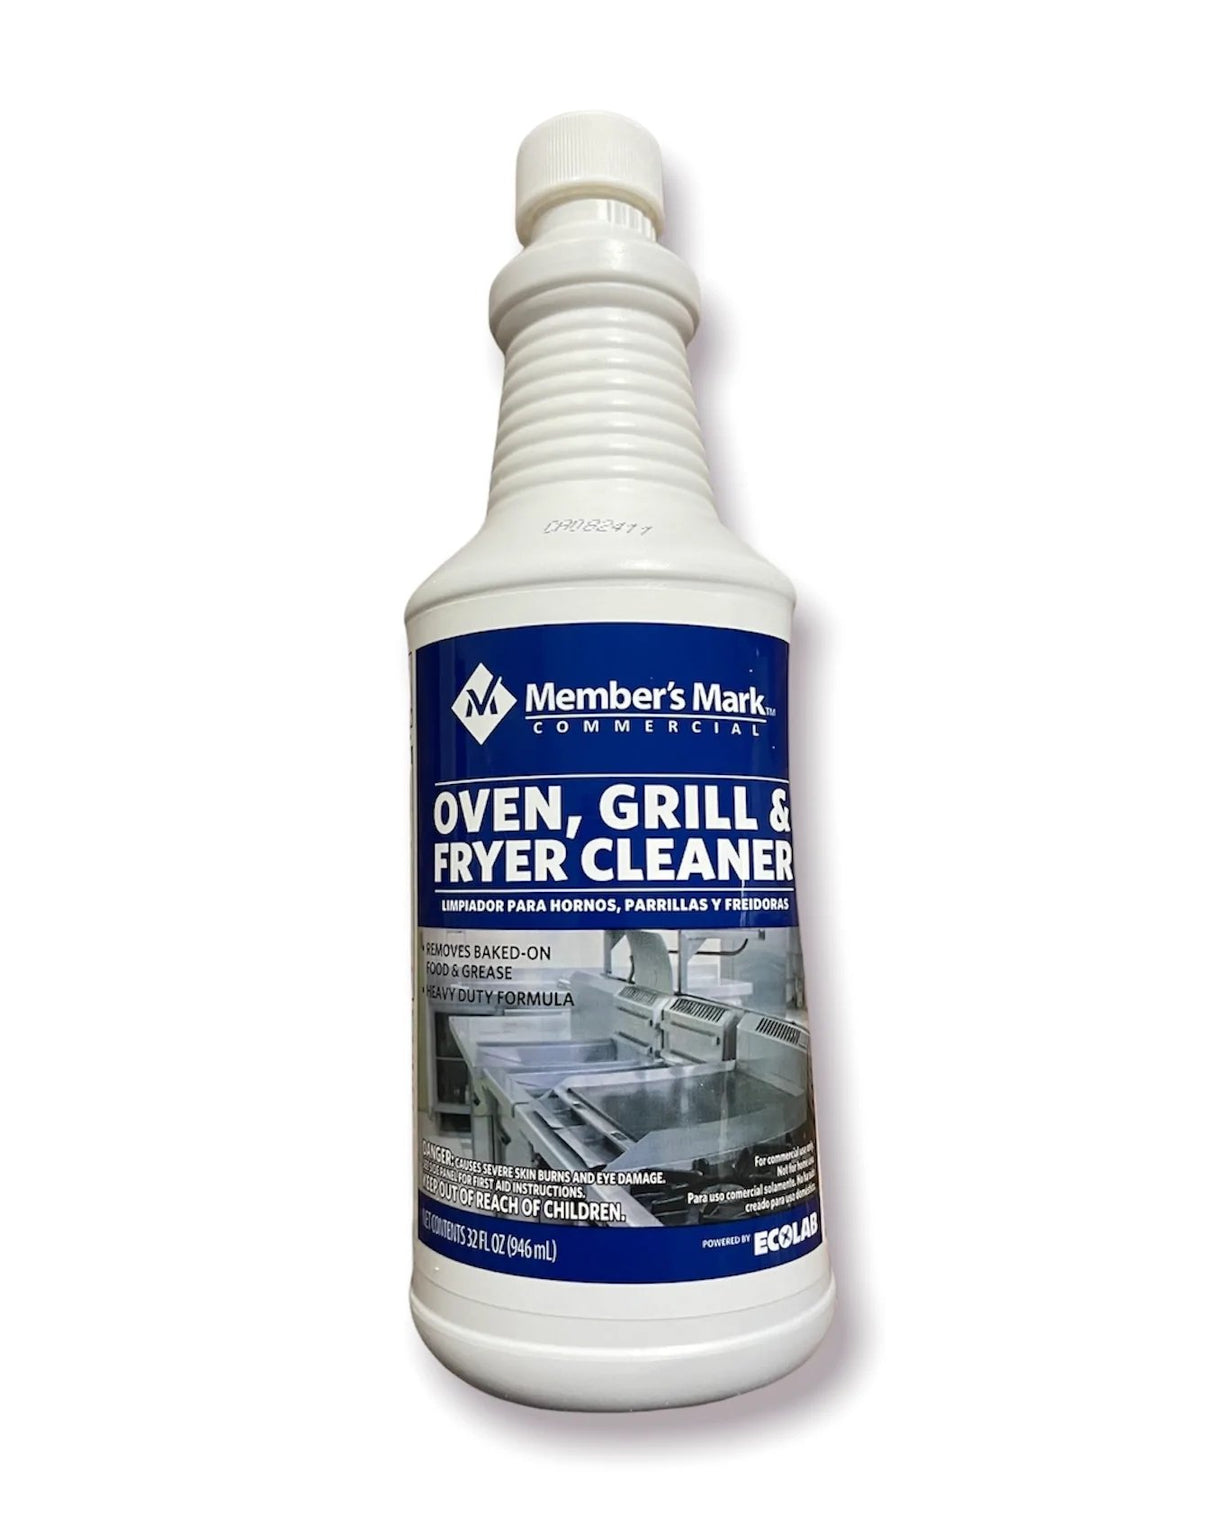 6 PACK - Member's Mark Commercial Oven, Grill and Fryer Cleaner (32 oz.)